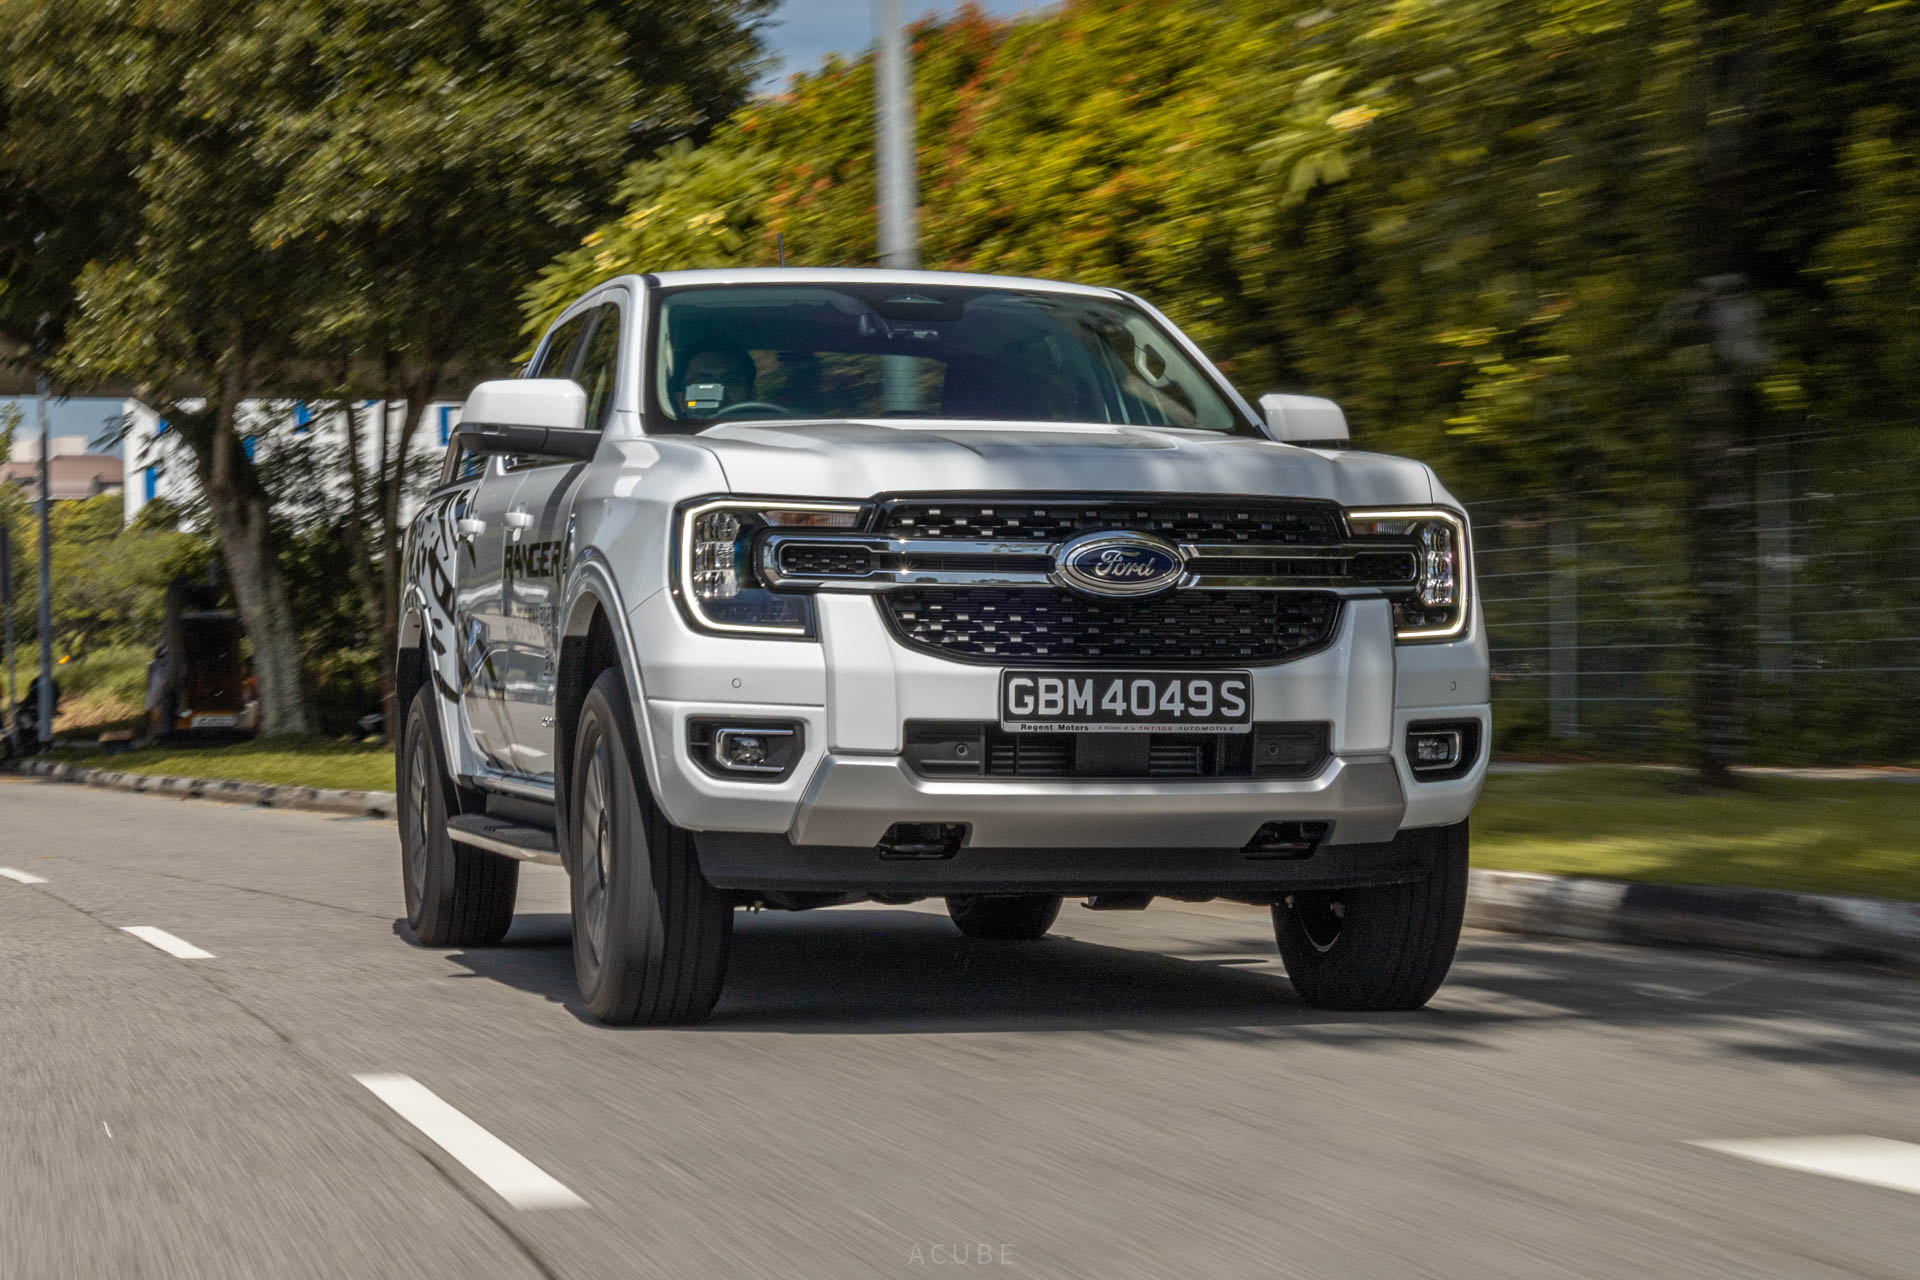 mreview: 2023 ford ranger - more than just a truck